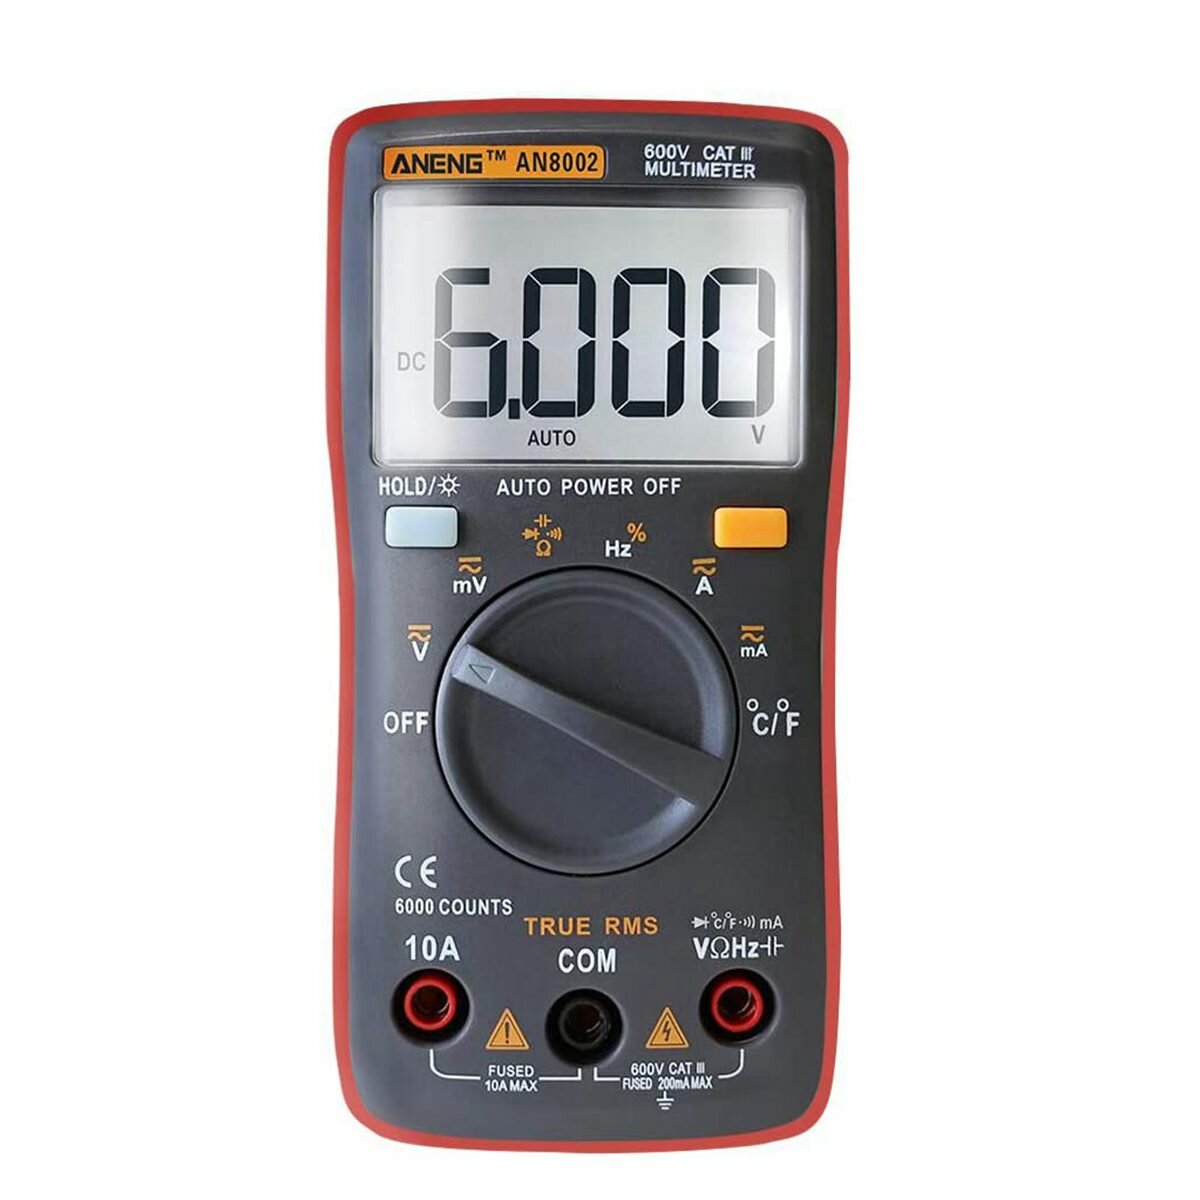 ANENG AN8002 Digitale True RMS 6000 Counts Multimeter AC/DC Stroom Spanning Frequentie Weerstand Tem